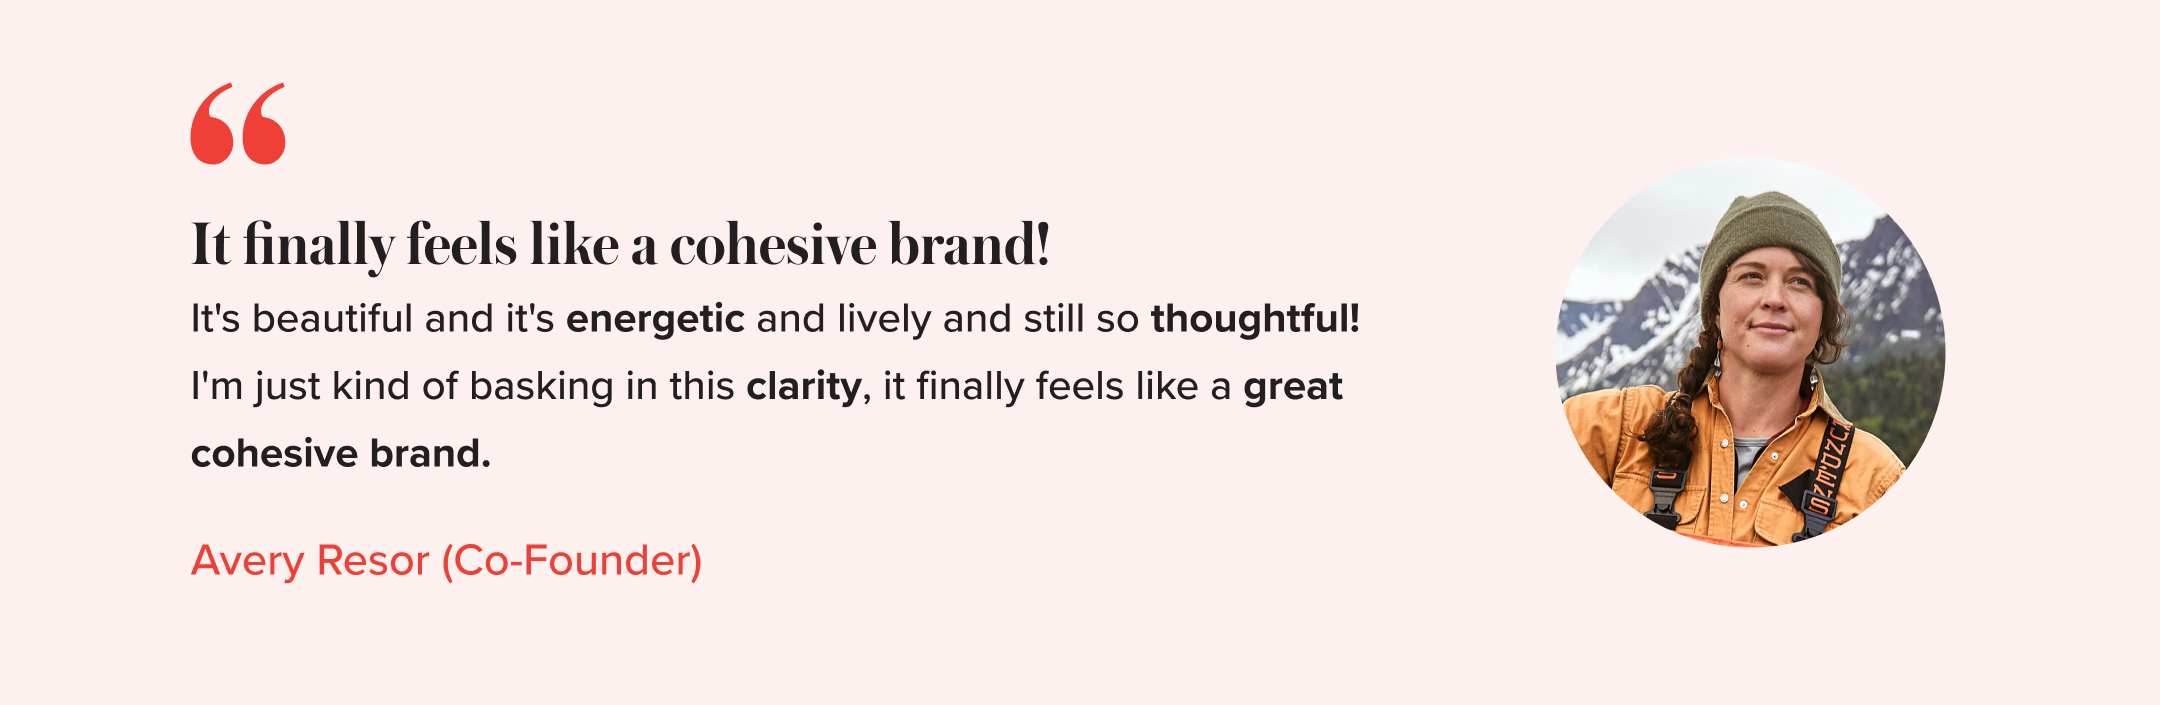 client-happy-review-brand-trust.png